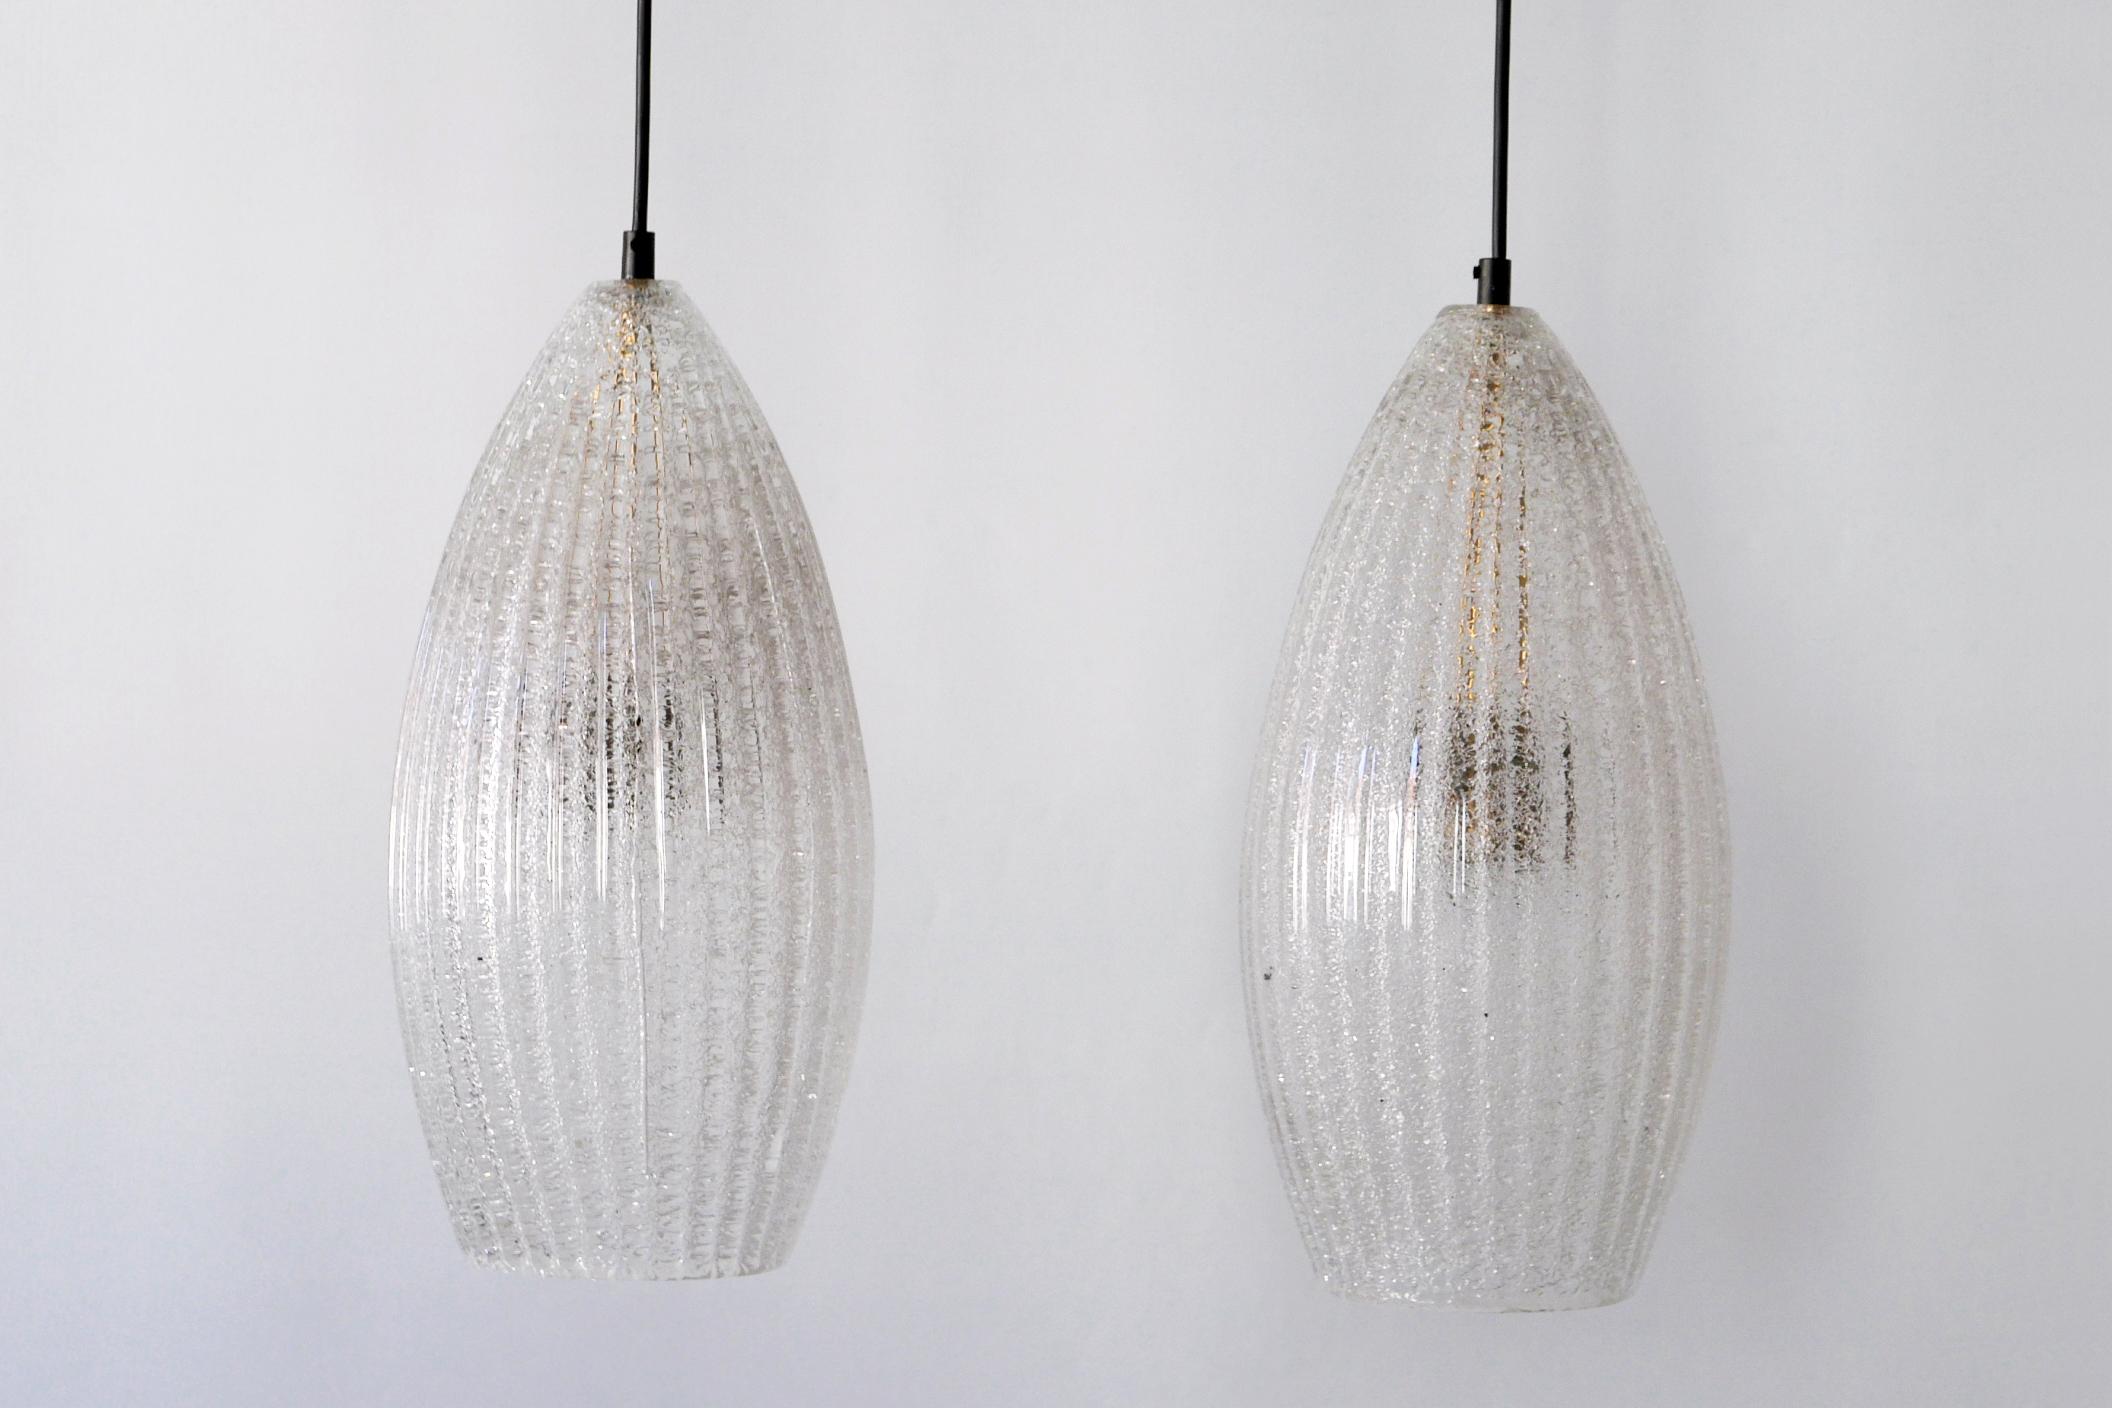 Mid-20th Century Set of Two Mid-Century Modern Textured Glass Pendant Lamps, 1960s, Germany For Sale